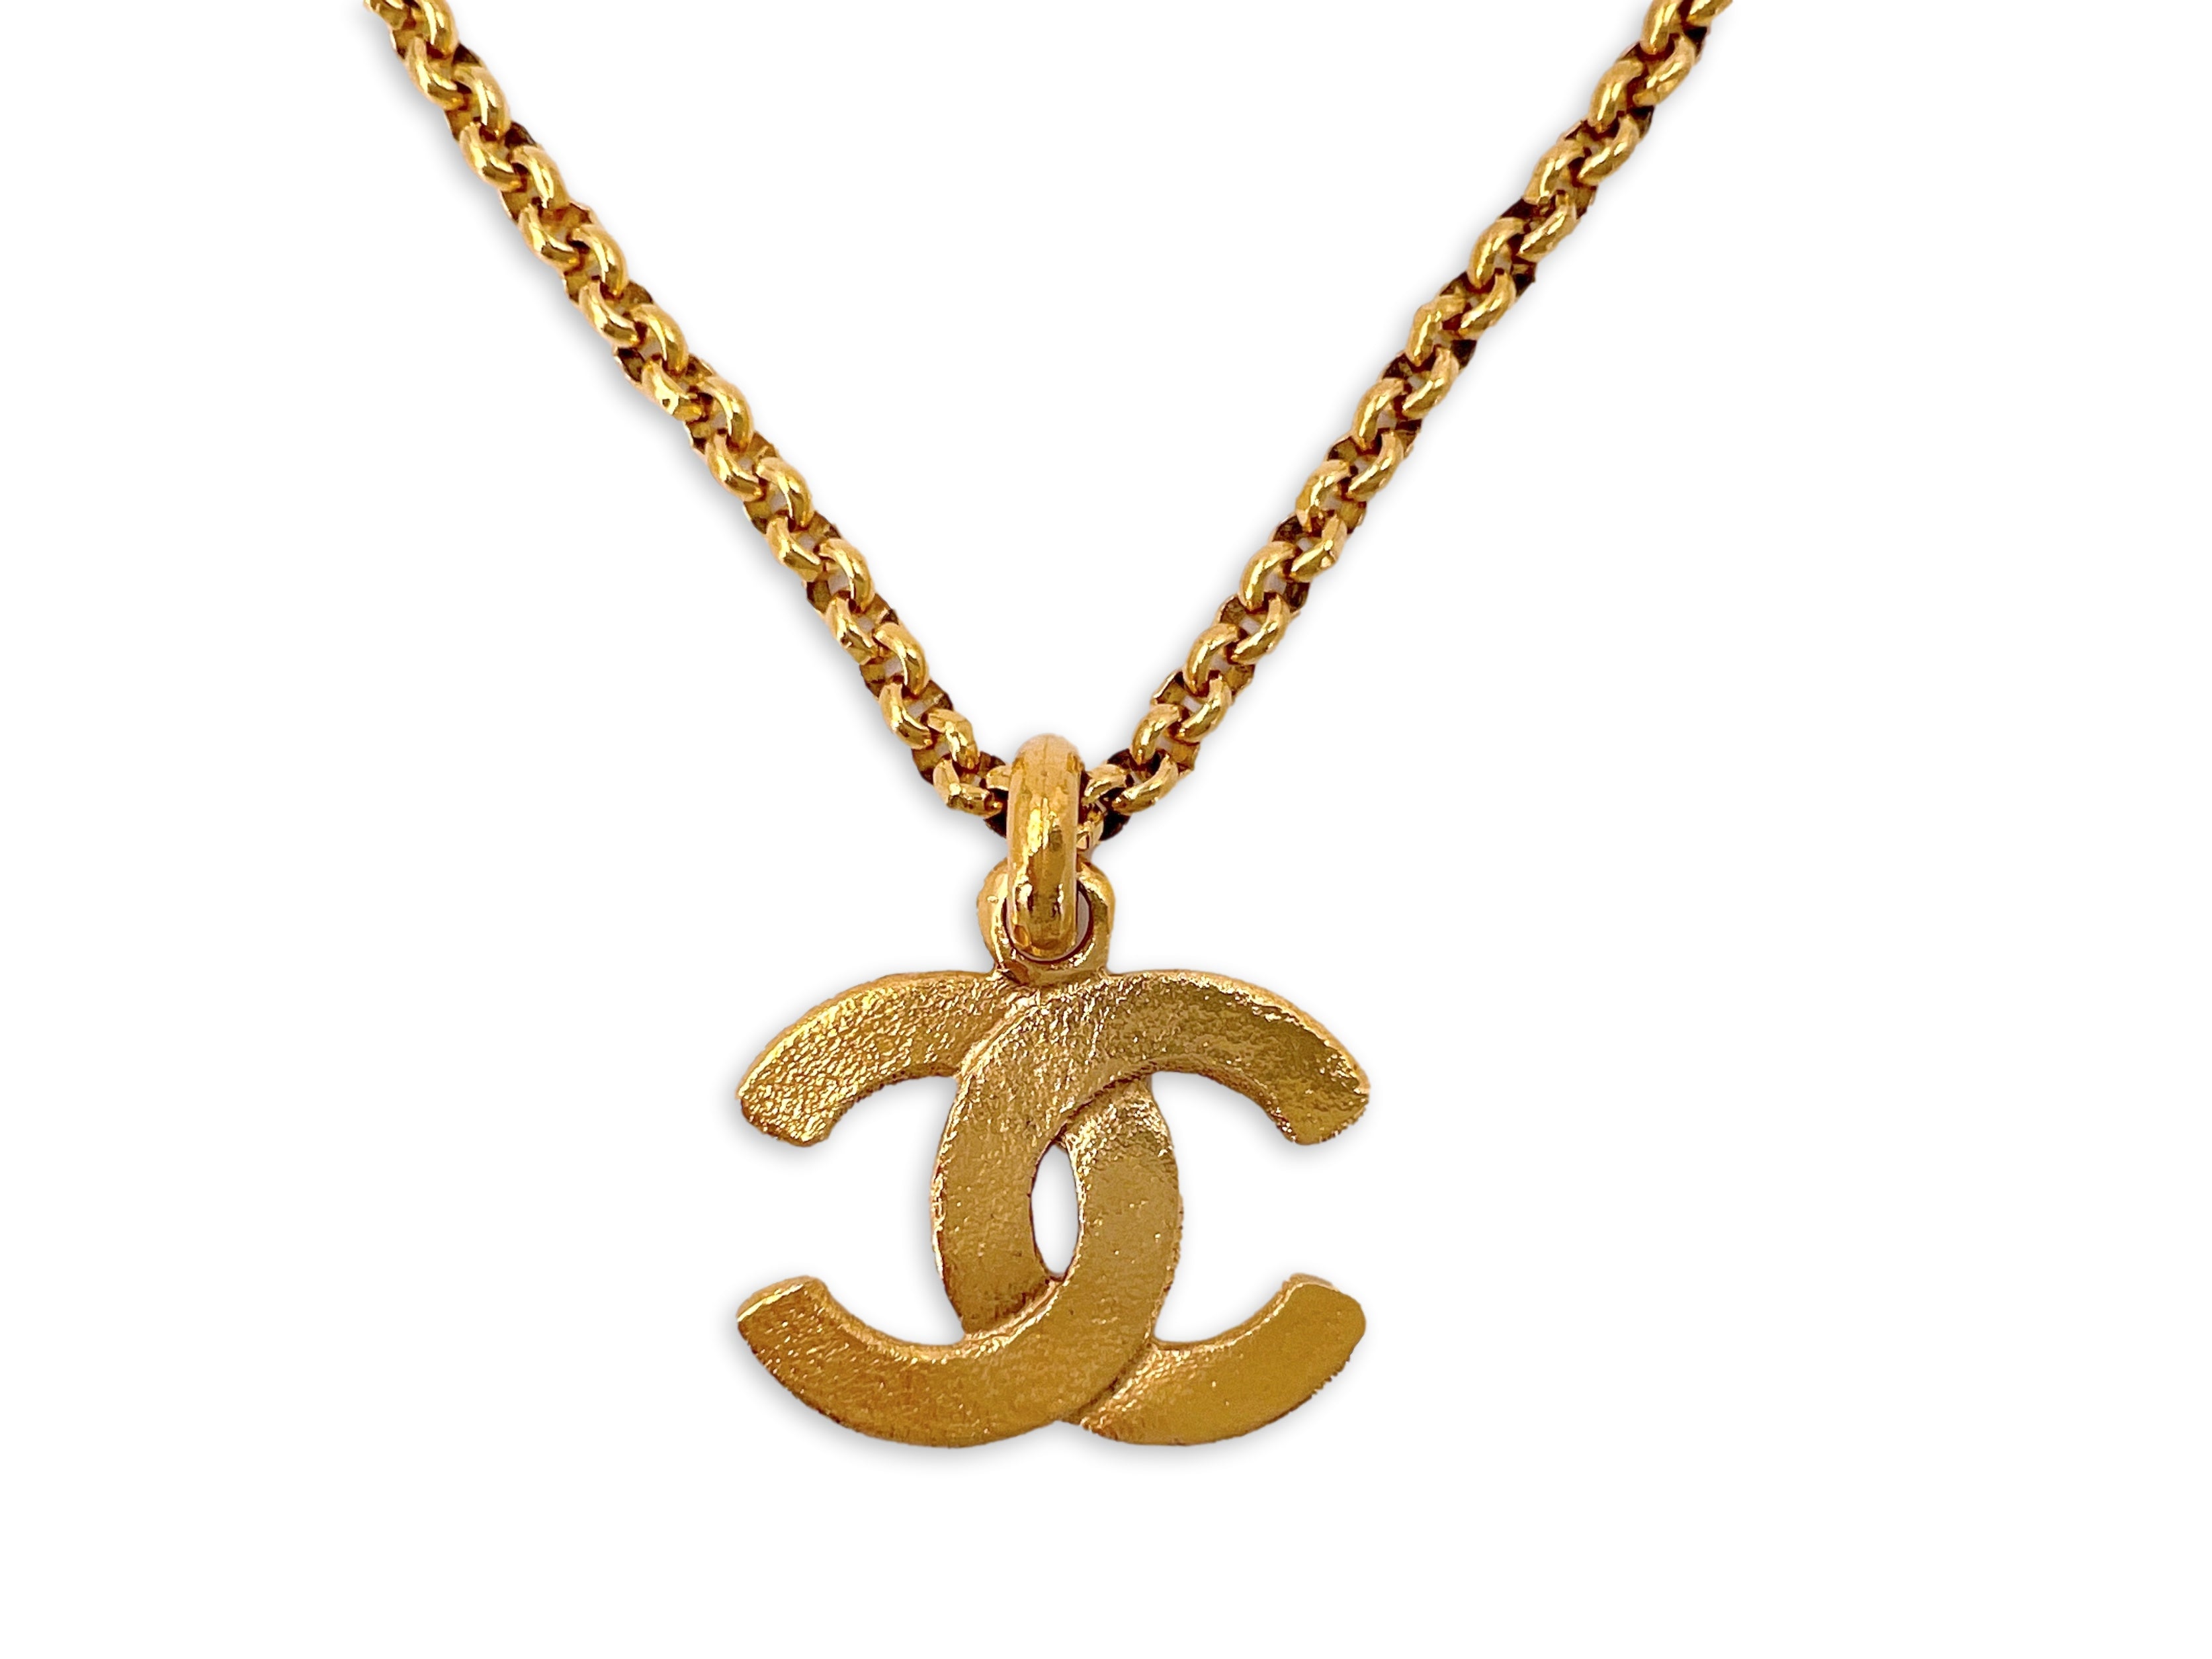 Chanel Vintage Beaded Necklace with Hammered CC Logo Pendant